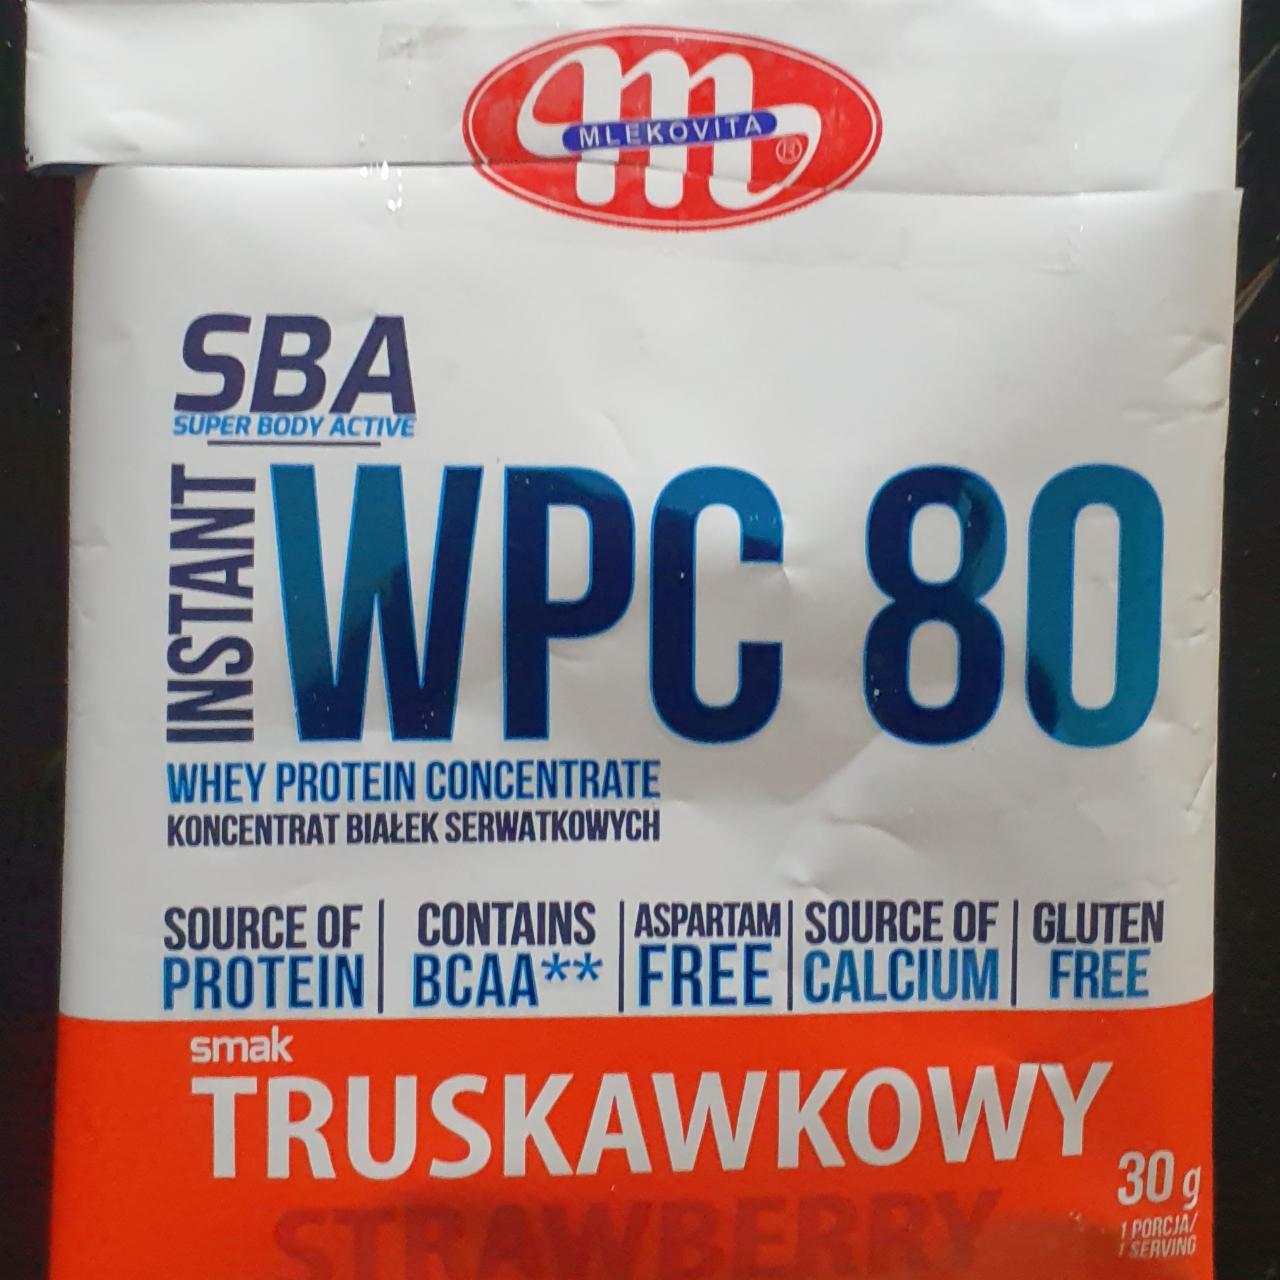 Fotografie - Super Body Active WPC 80 Whey Protein Concentrate smak Truskawkowy Mlekovita